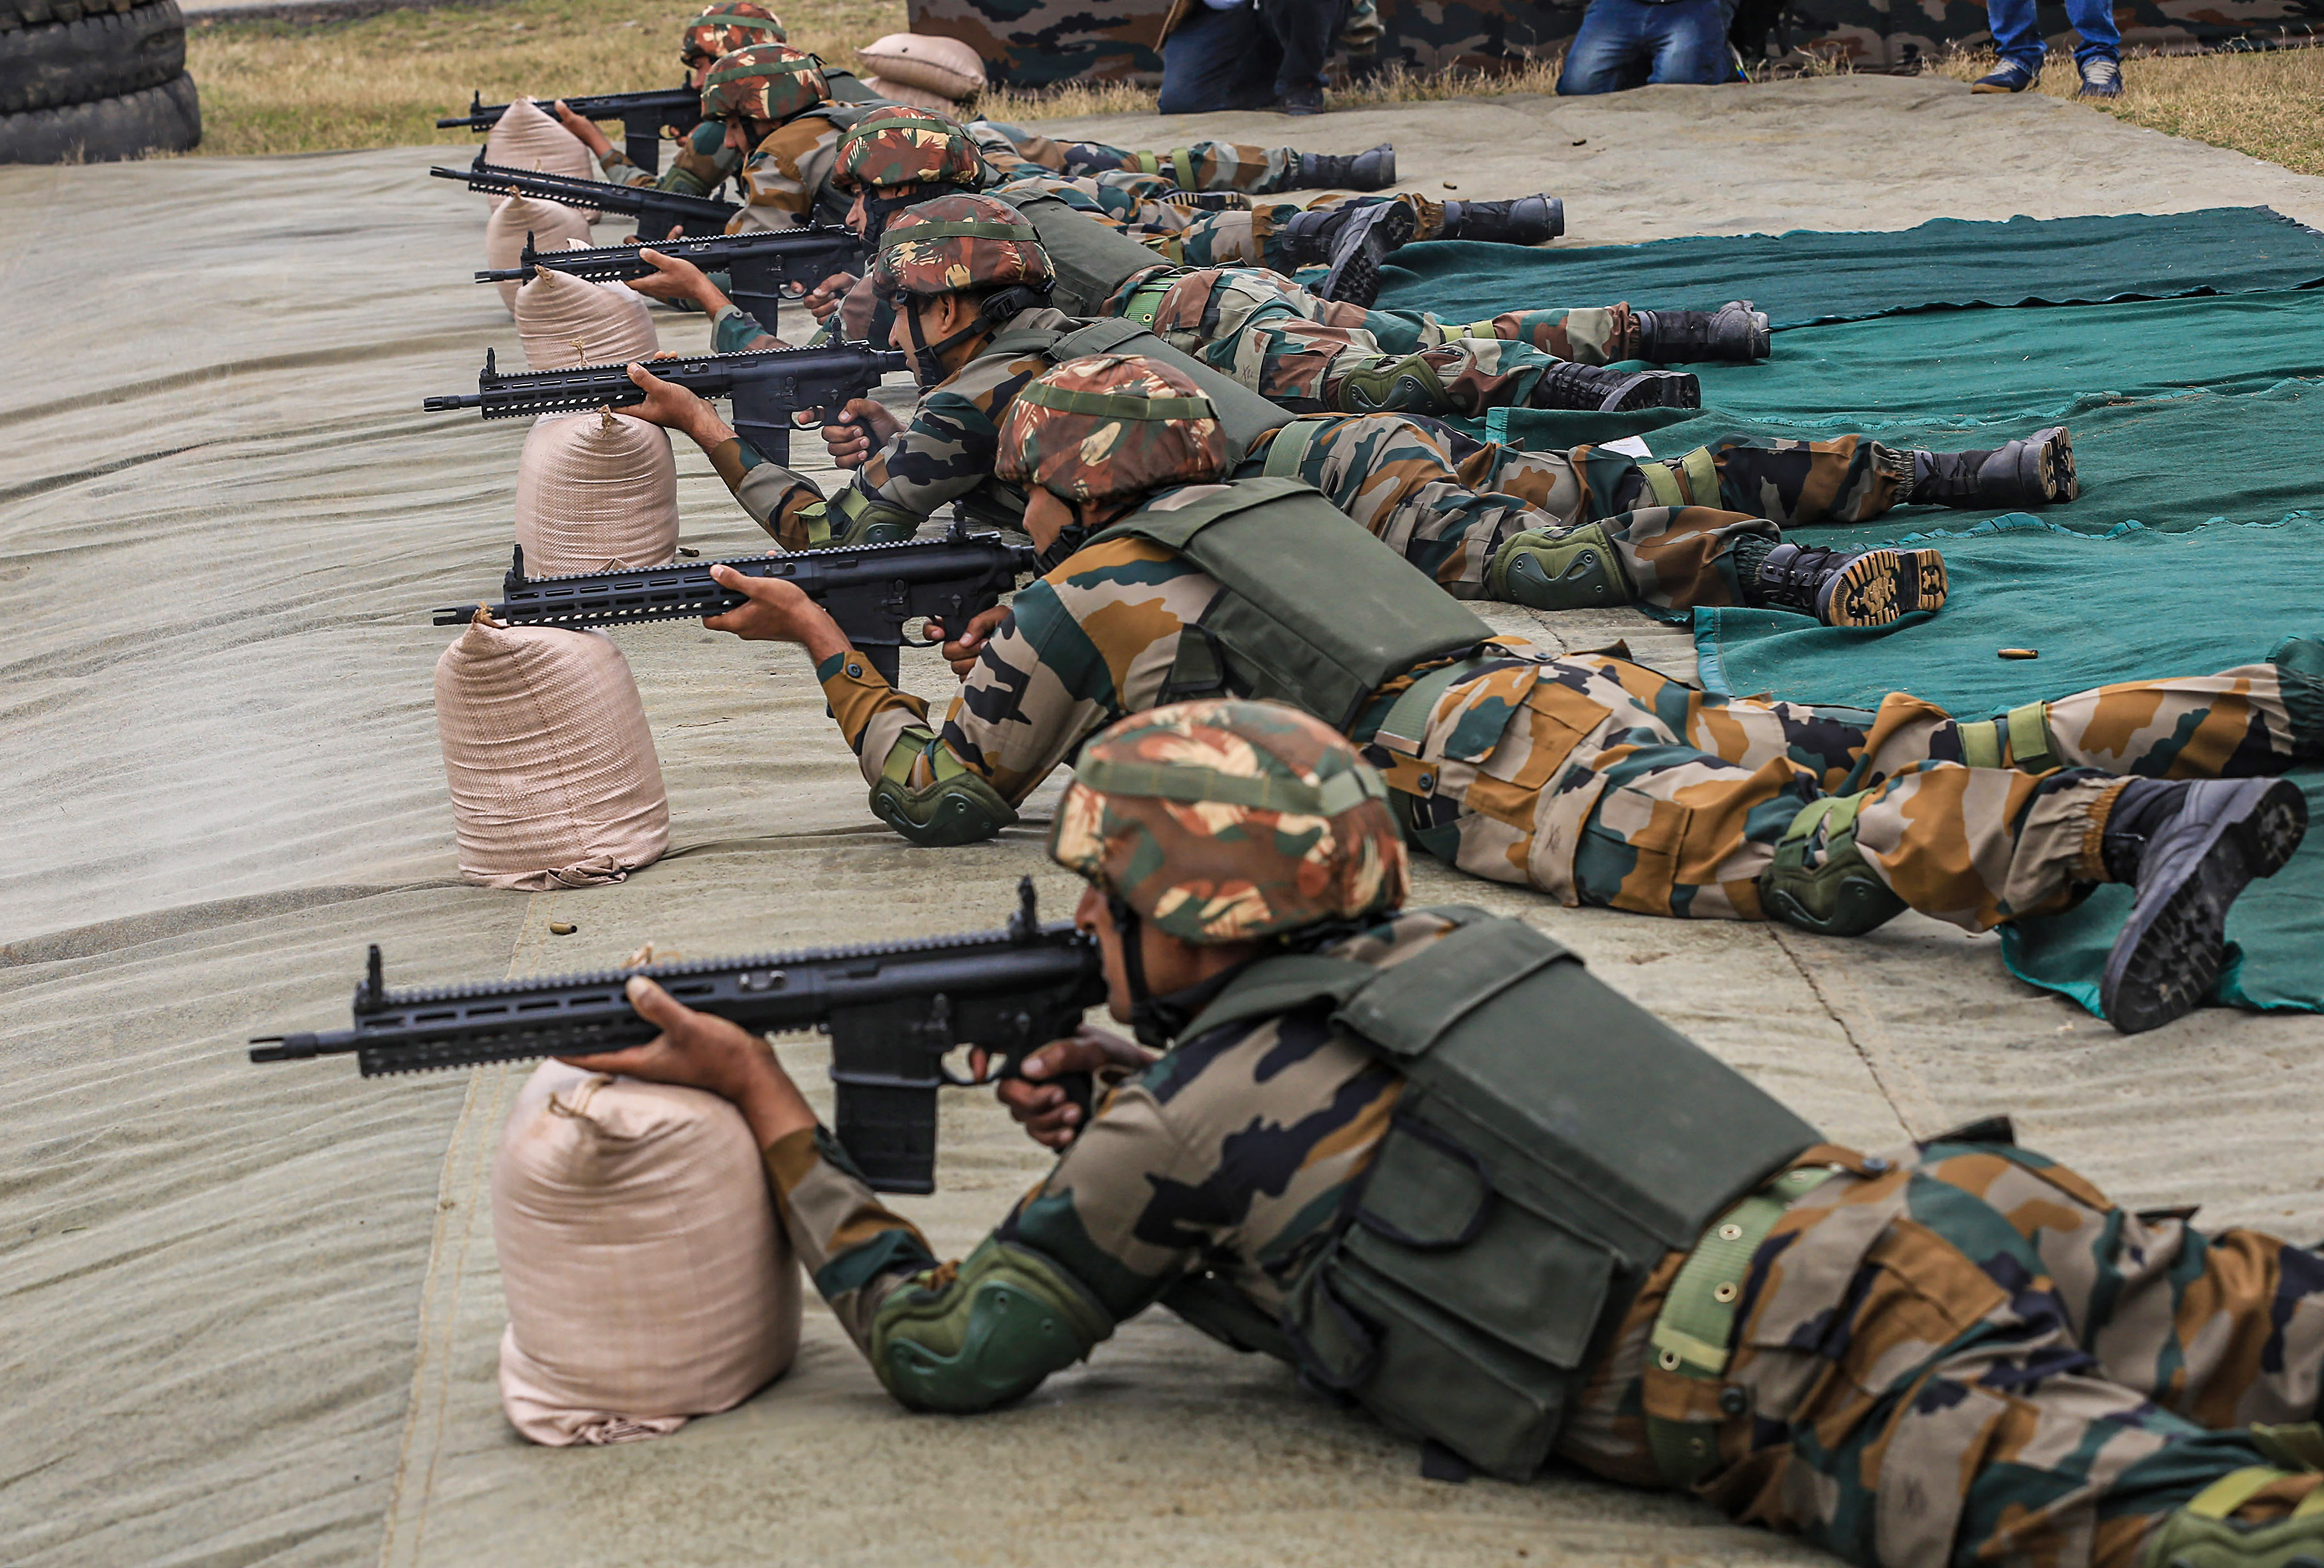 Army starts training for Agniveers under the new Agnipath Scheme - Defence  News